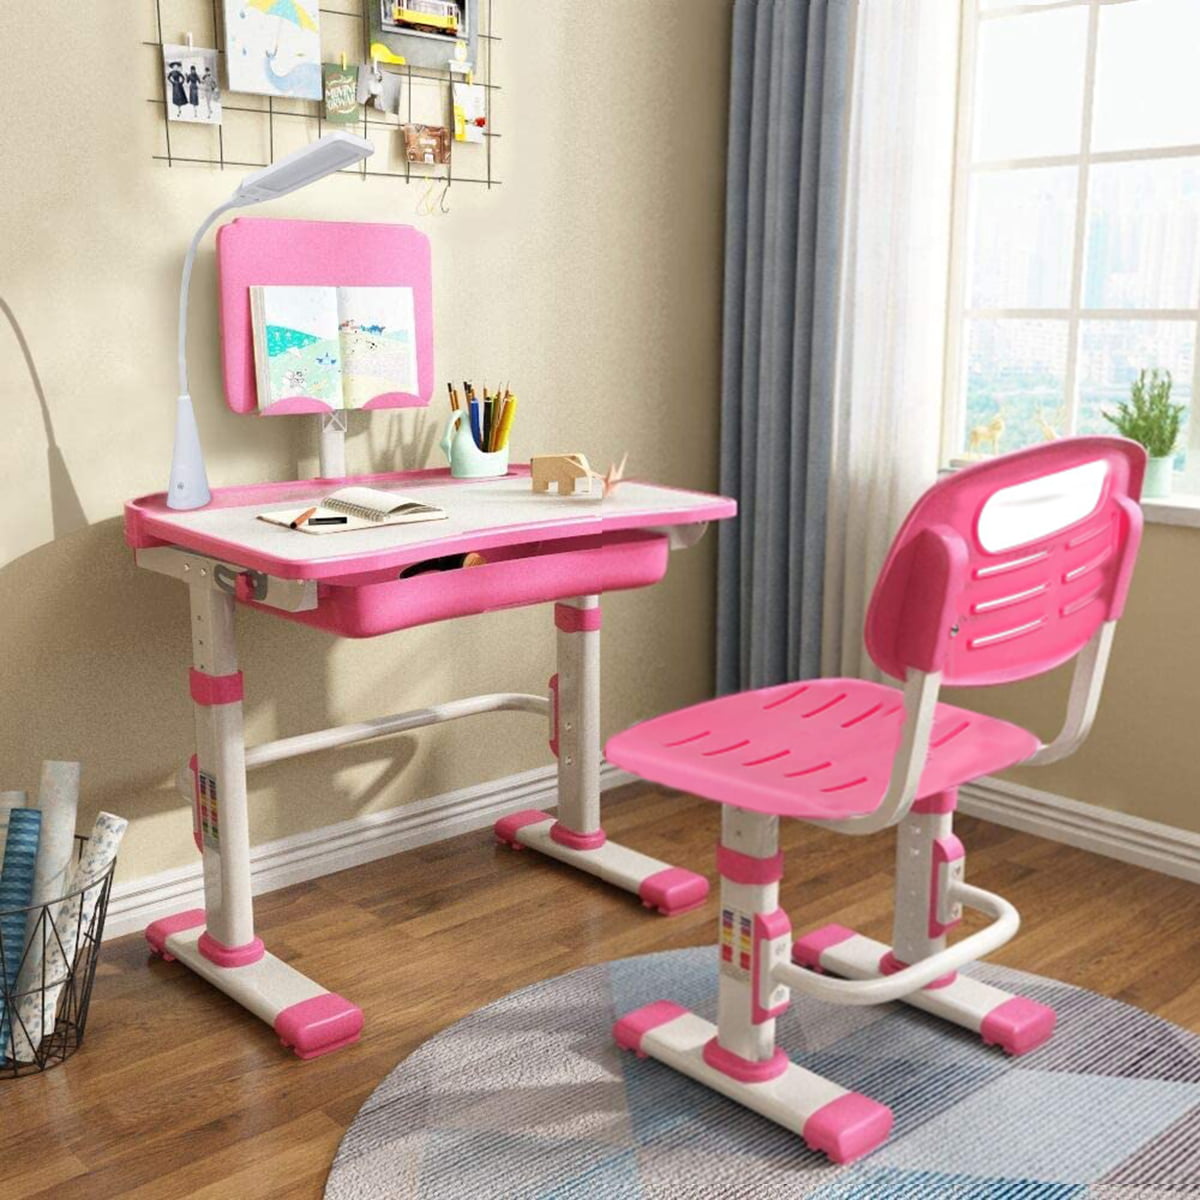 Details about   Adjustable Children's Desk And Chair Set Child Study Kids Learning Study Table 